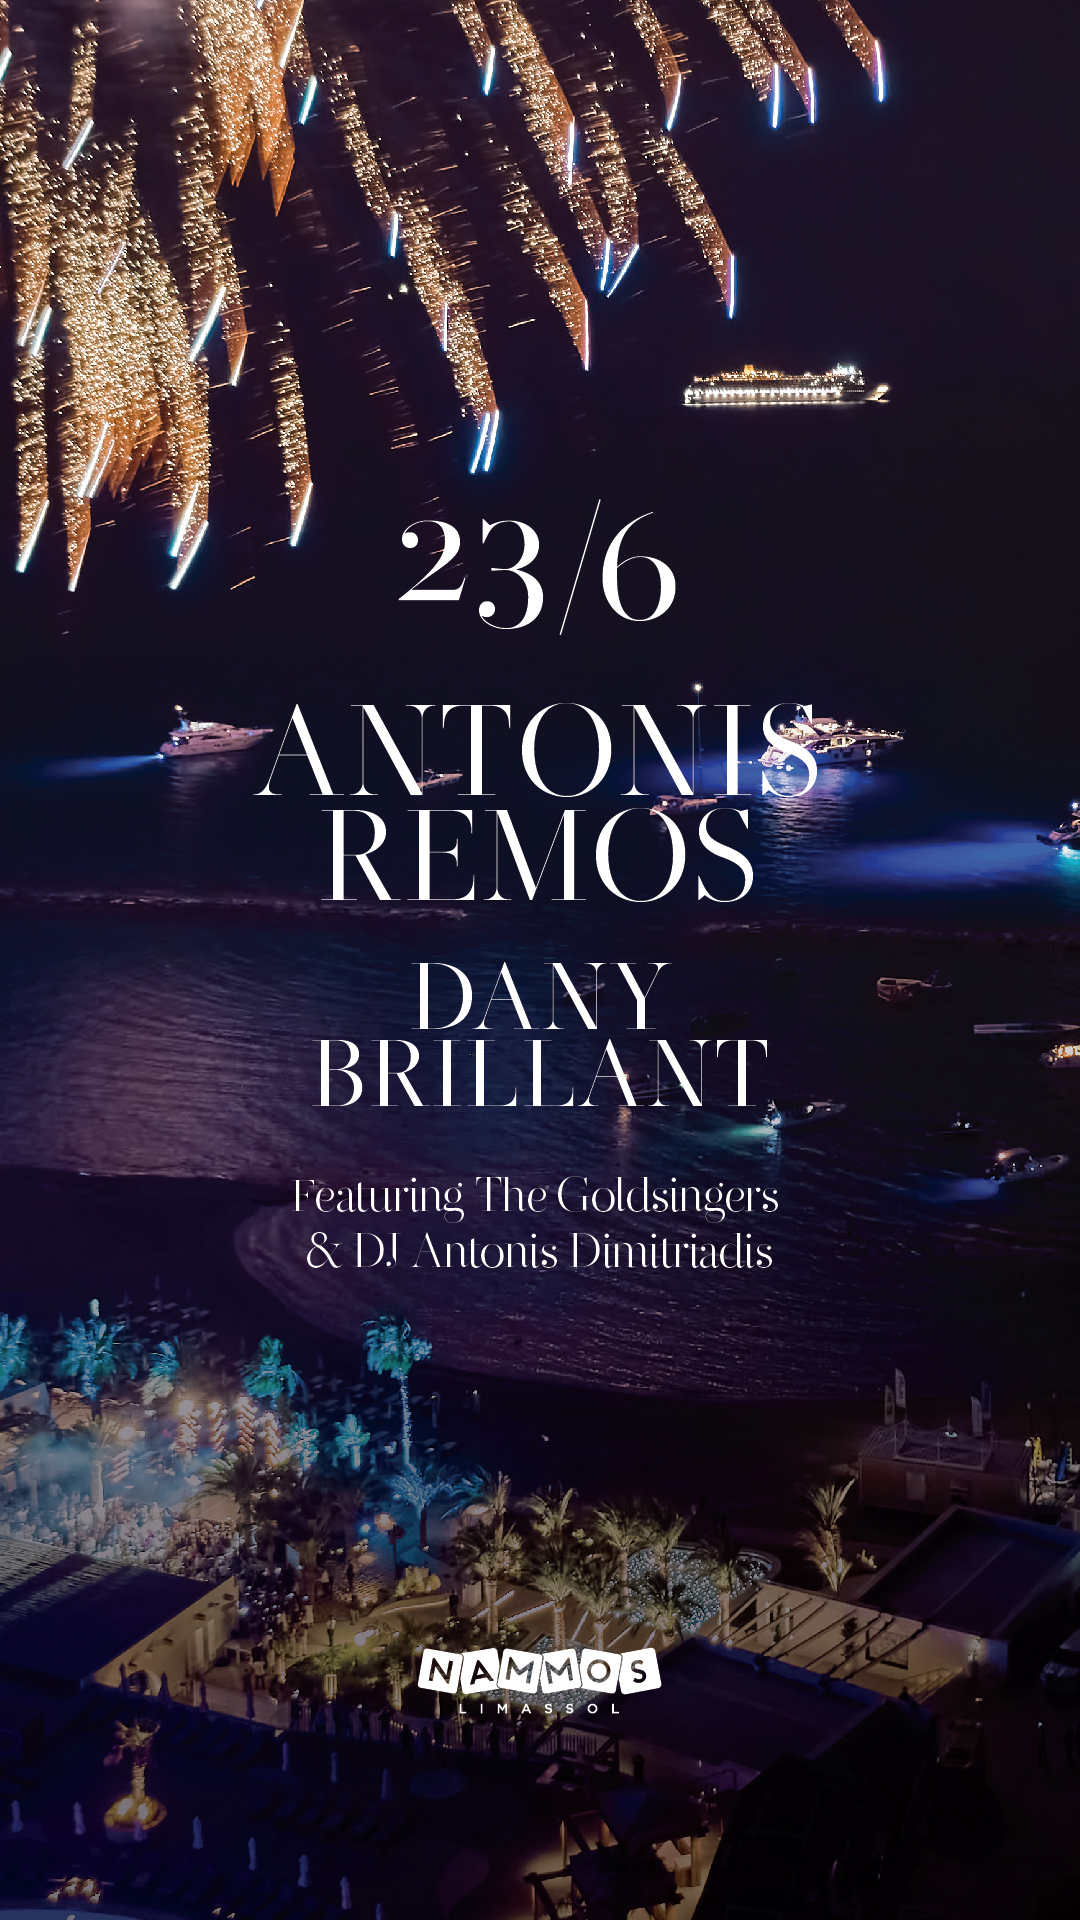 Antonis Remos and Dany Brilliant in concert at Nammos Limassol 23 June 2023